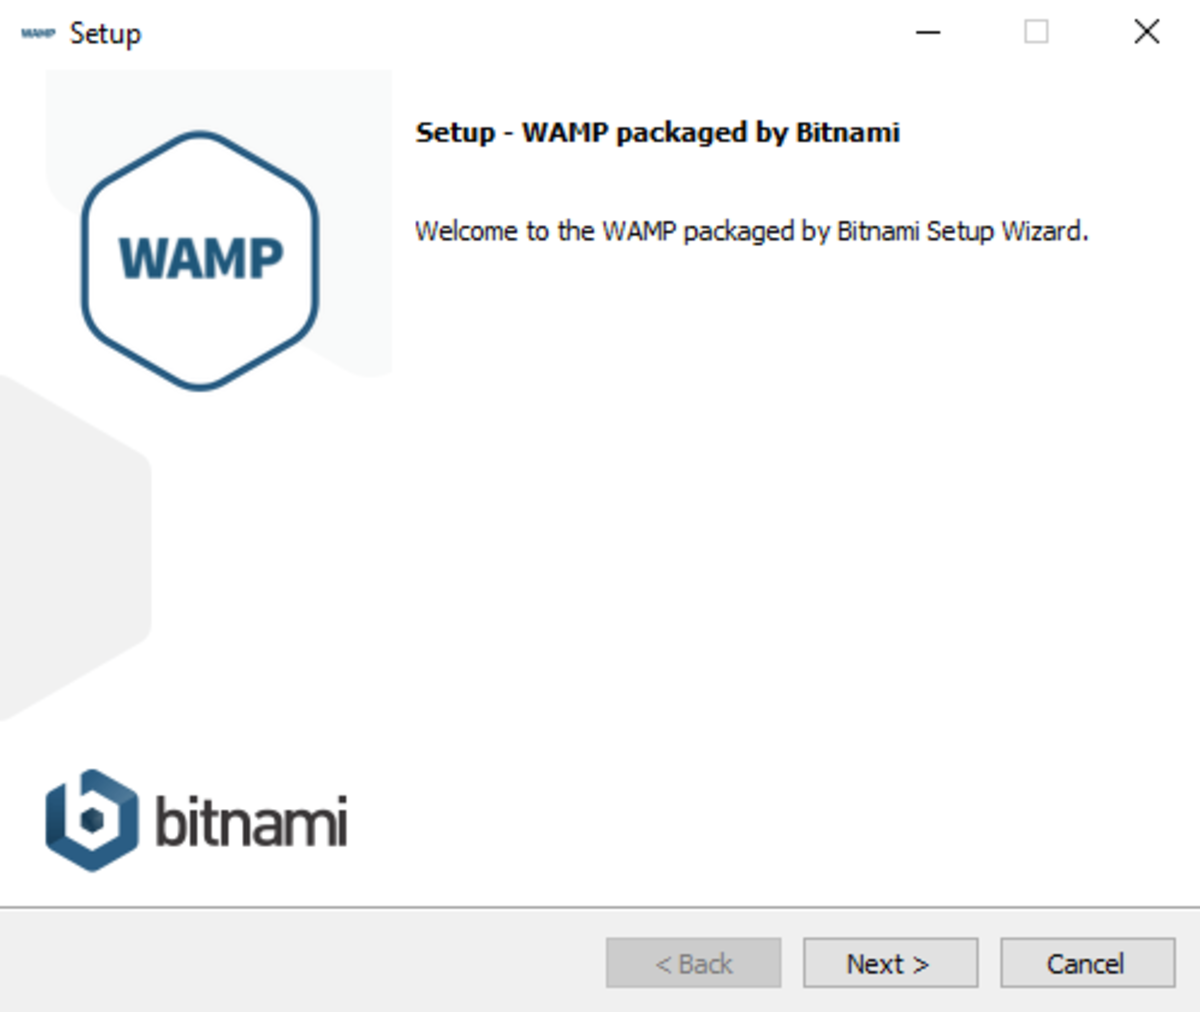 The installer for WAMP provided by Bitnami